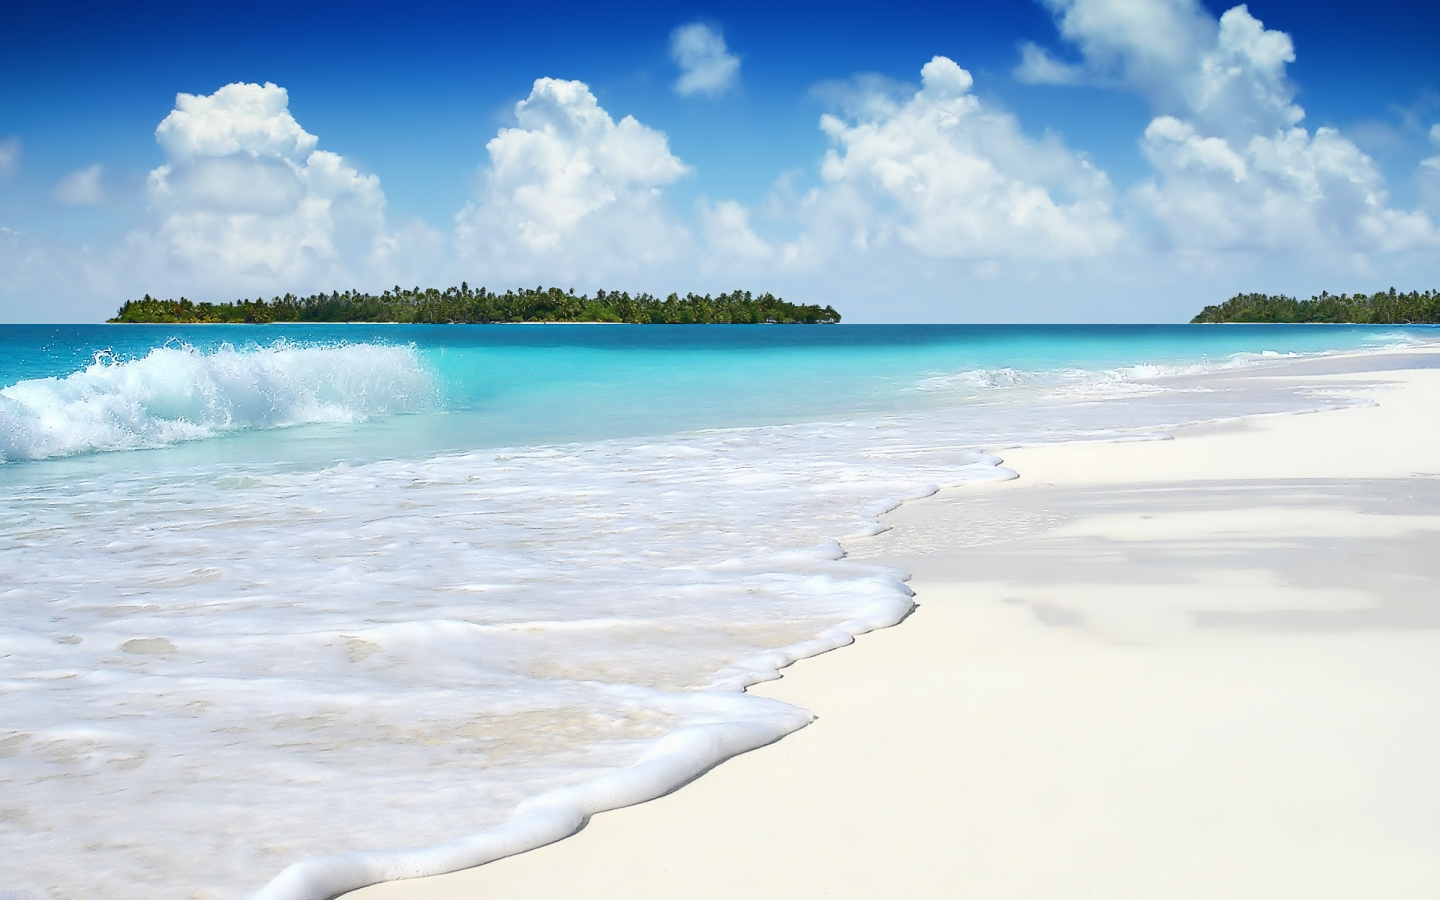 The Beautiful Summer Island for 1440 x 900 widescreen resolution